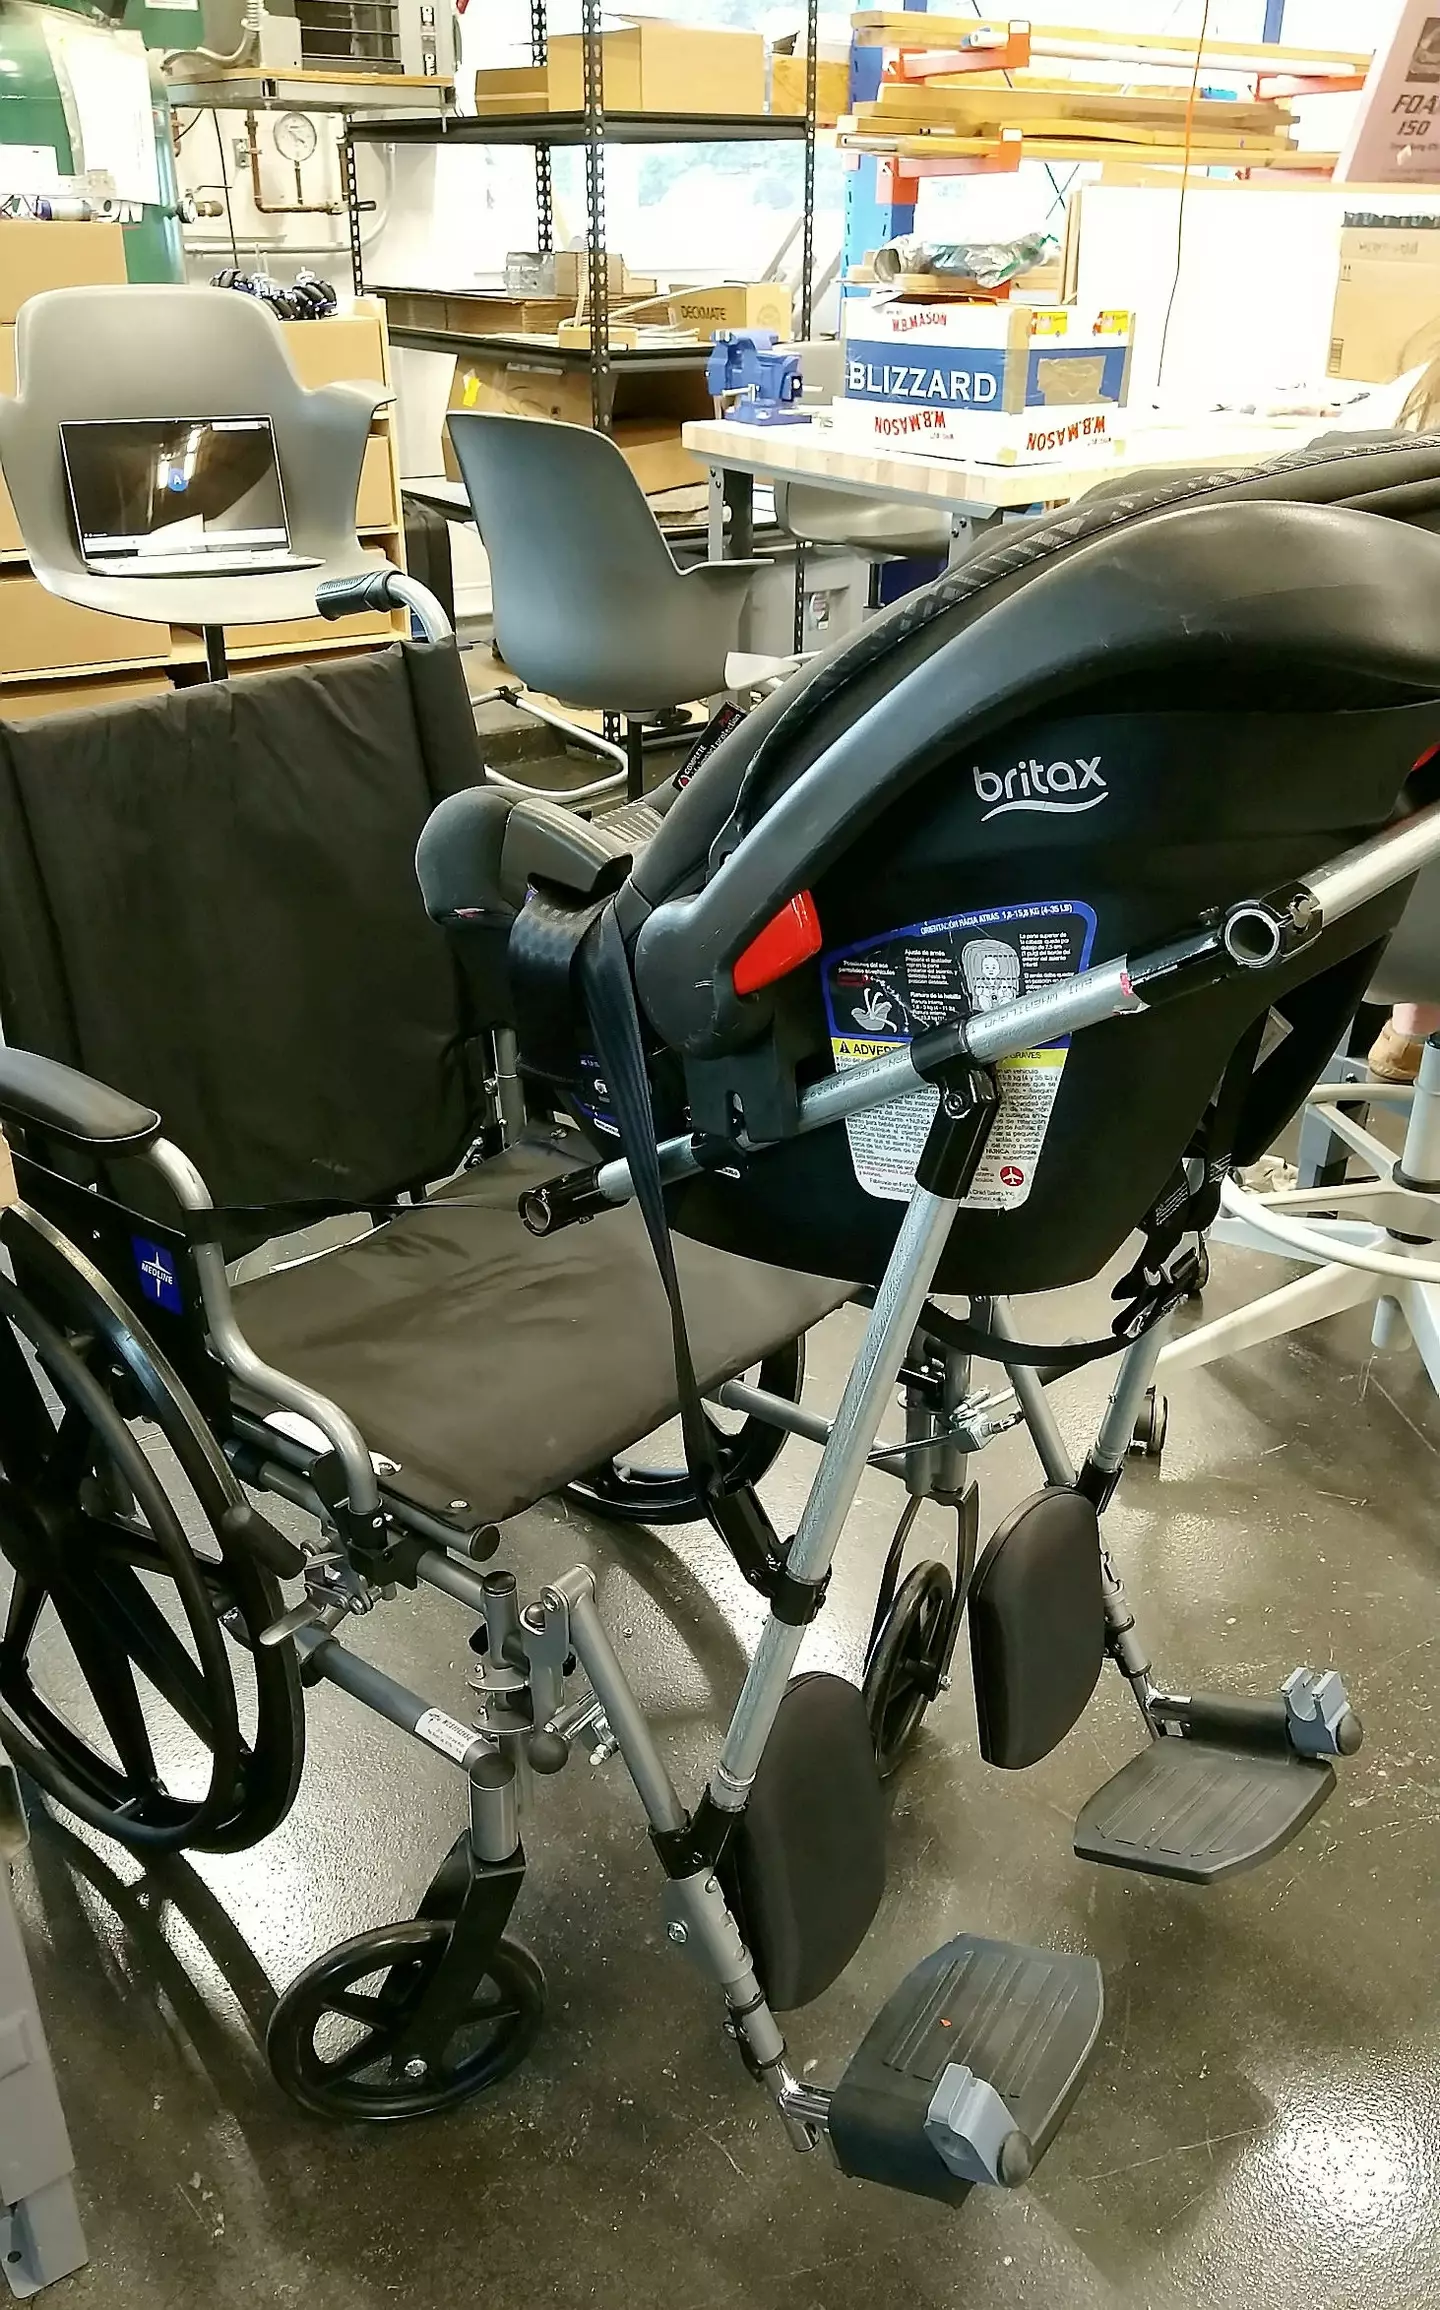 The stroller was designed by a bunch of school kids (